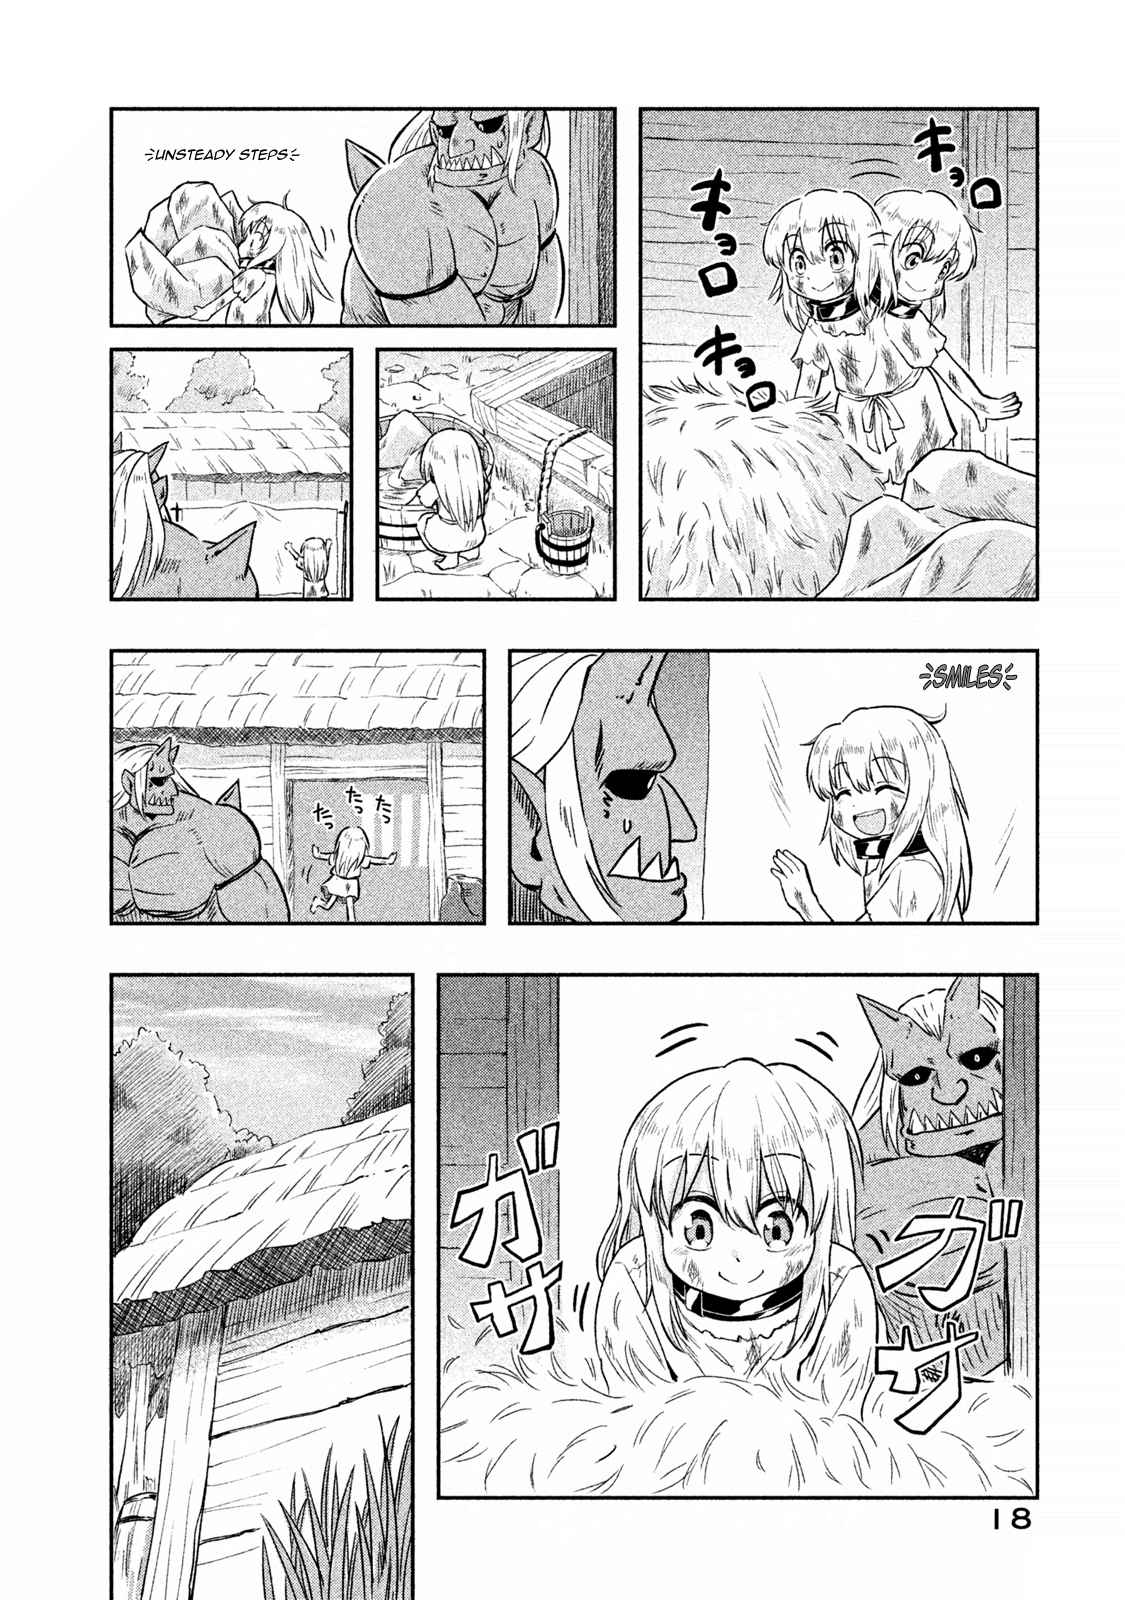 Ooga no Aniki to Doreichan Vol. 1 Ch. 2 Ogre and the Shabby Hut